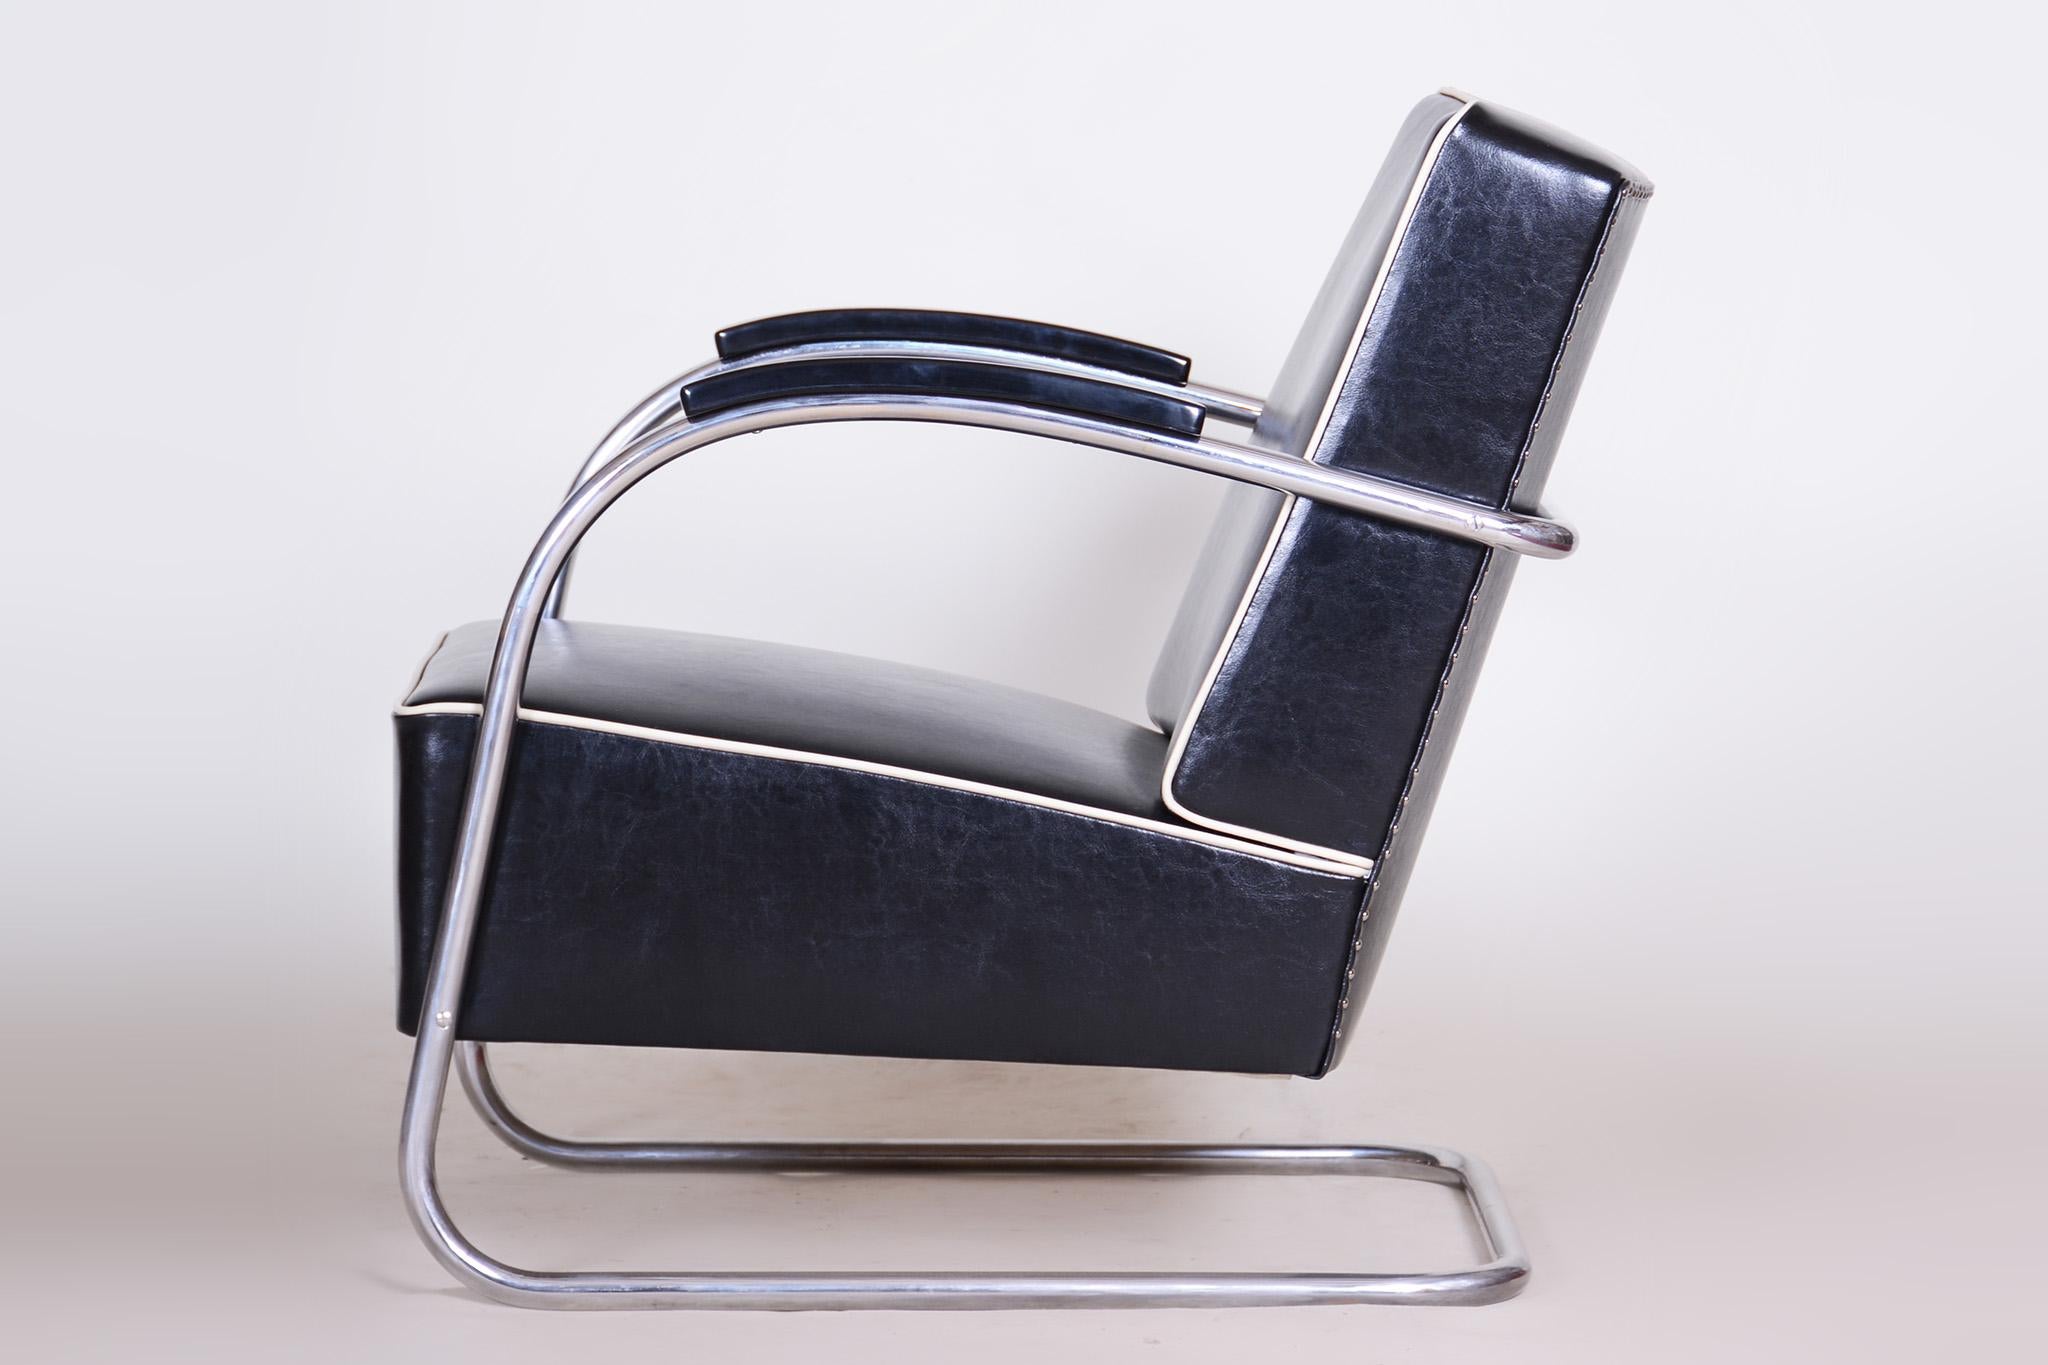 Black Leather Armchair, 1930s Czechia, Made by Mucke-Melder and Fully Restored For Sale 5